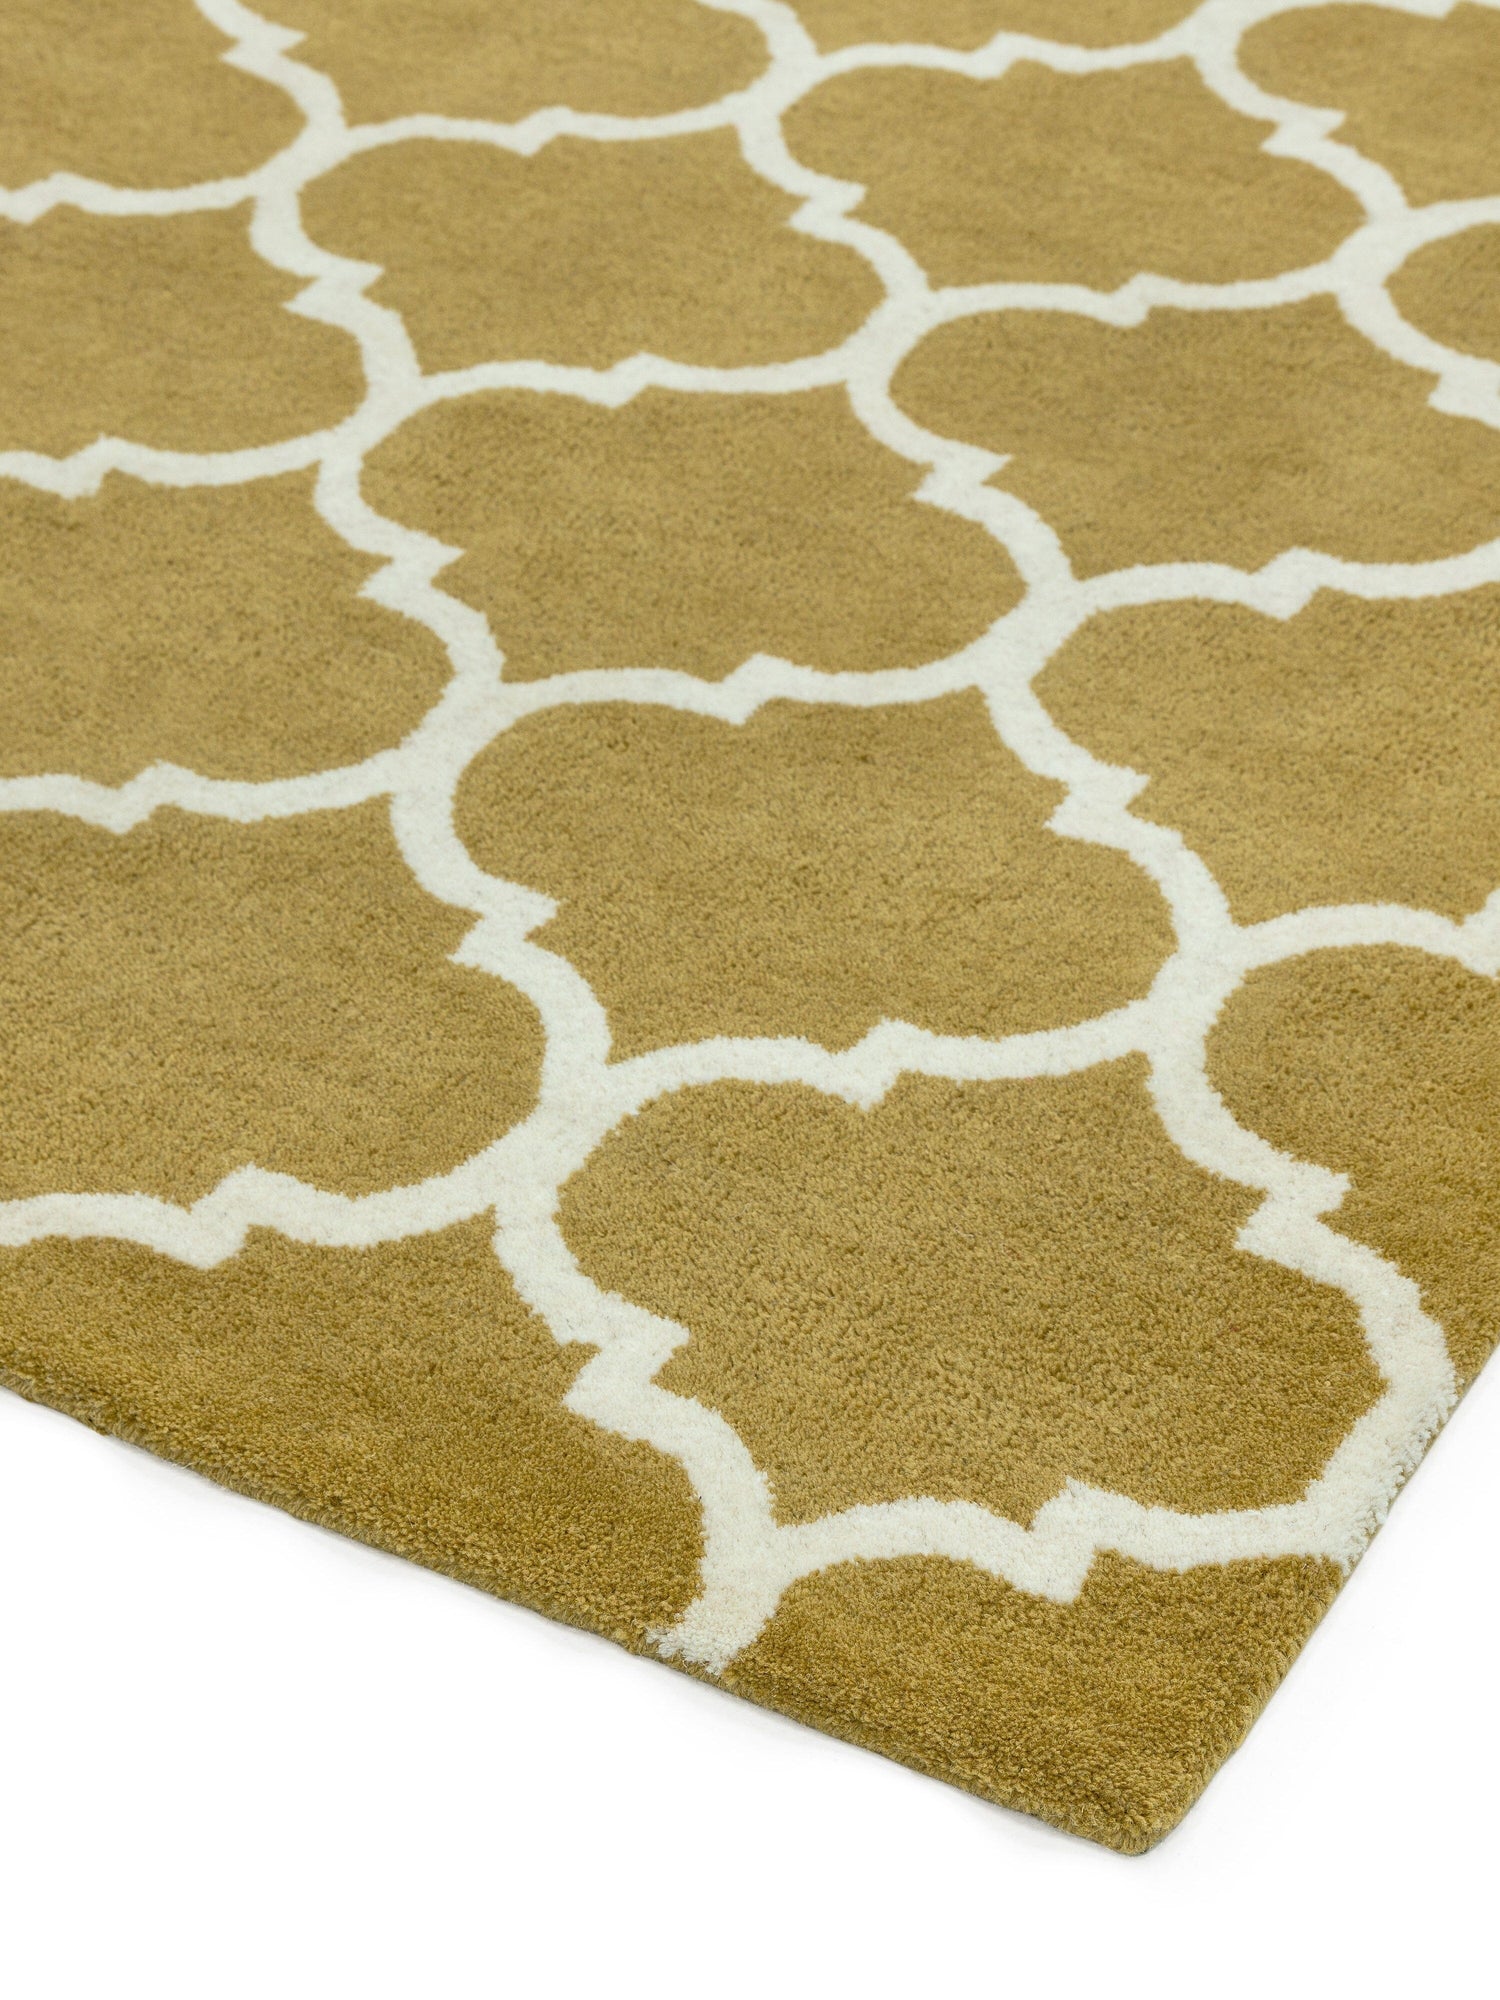  Asiatic Carpets-Asiatic Carpets Albany Handtufted Rug Ogee Ochre - 120 x 170cm-Yellow, Gold 469 